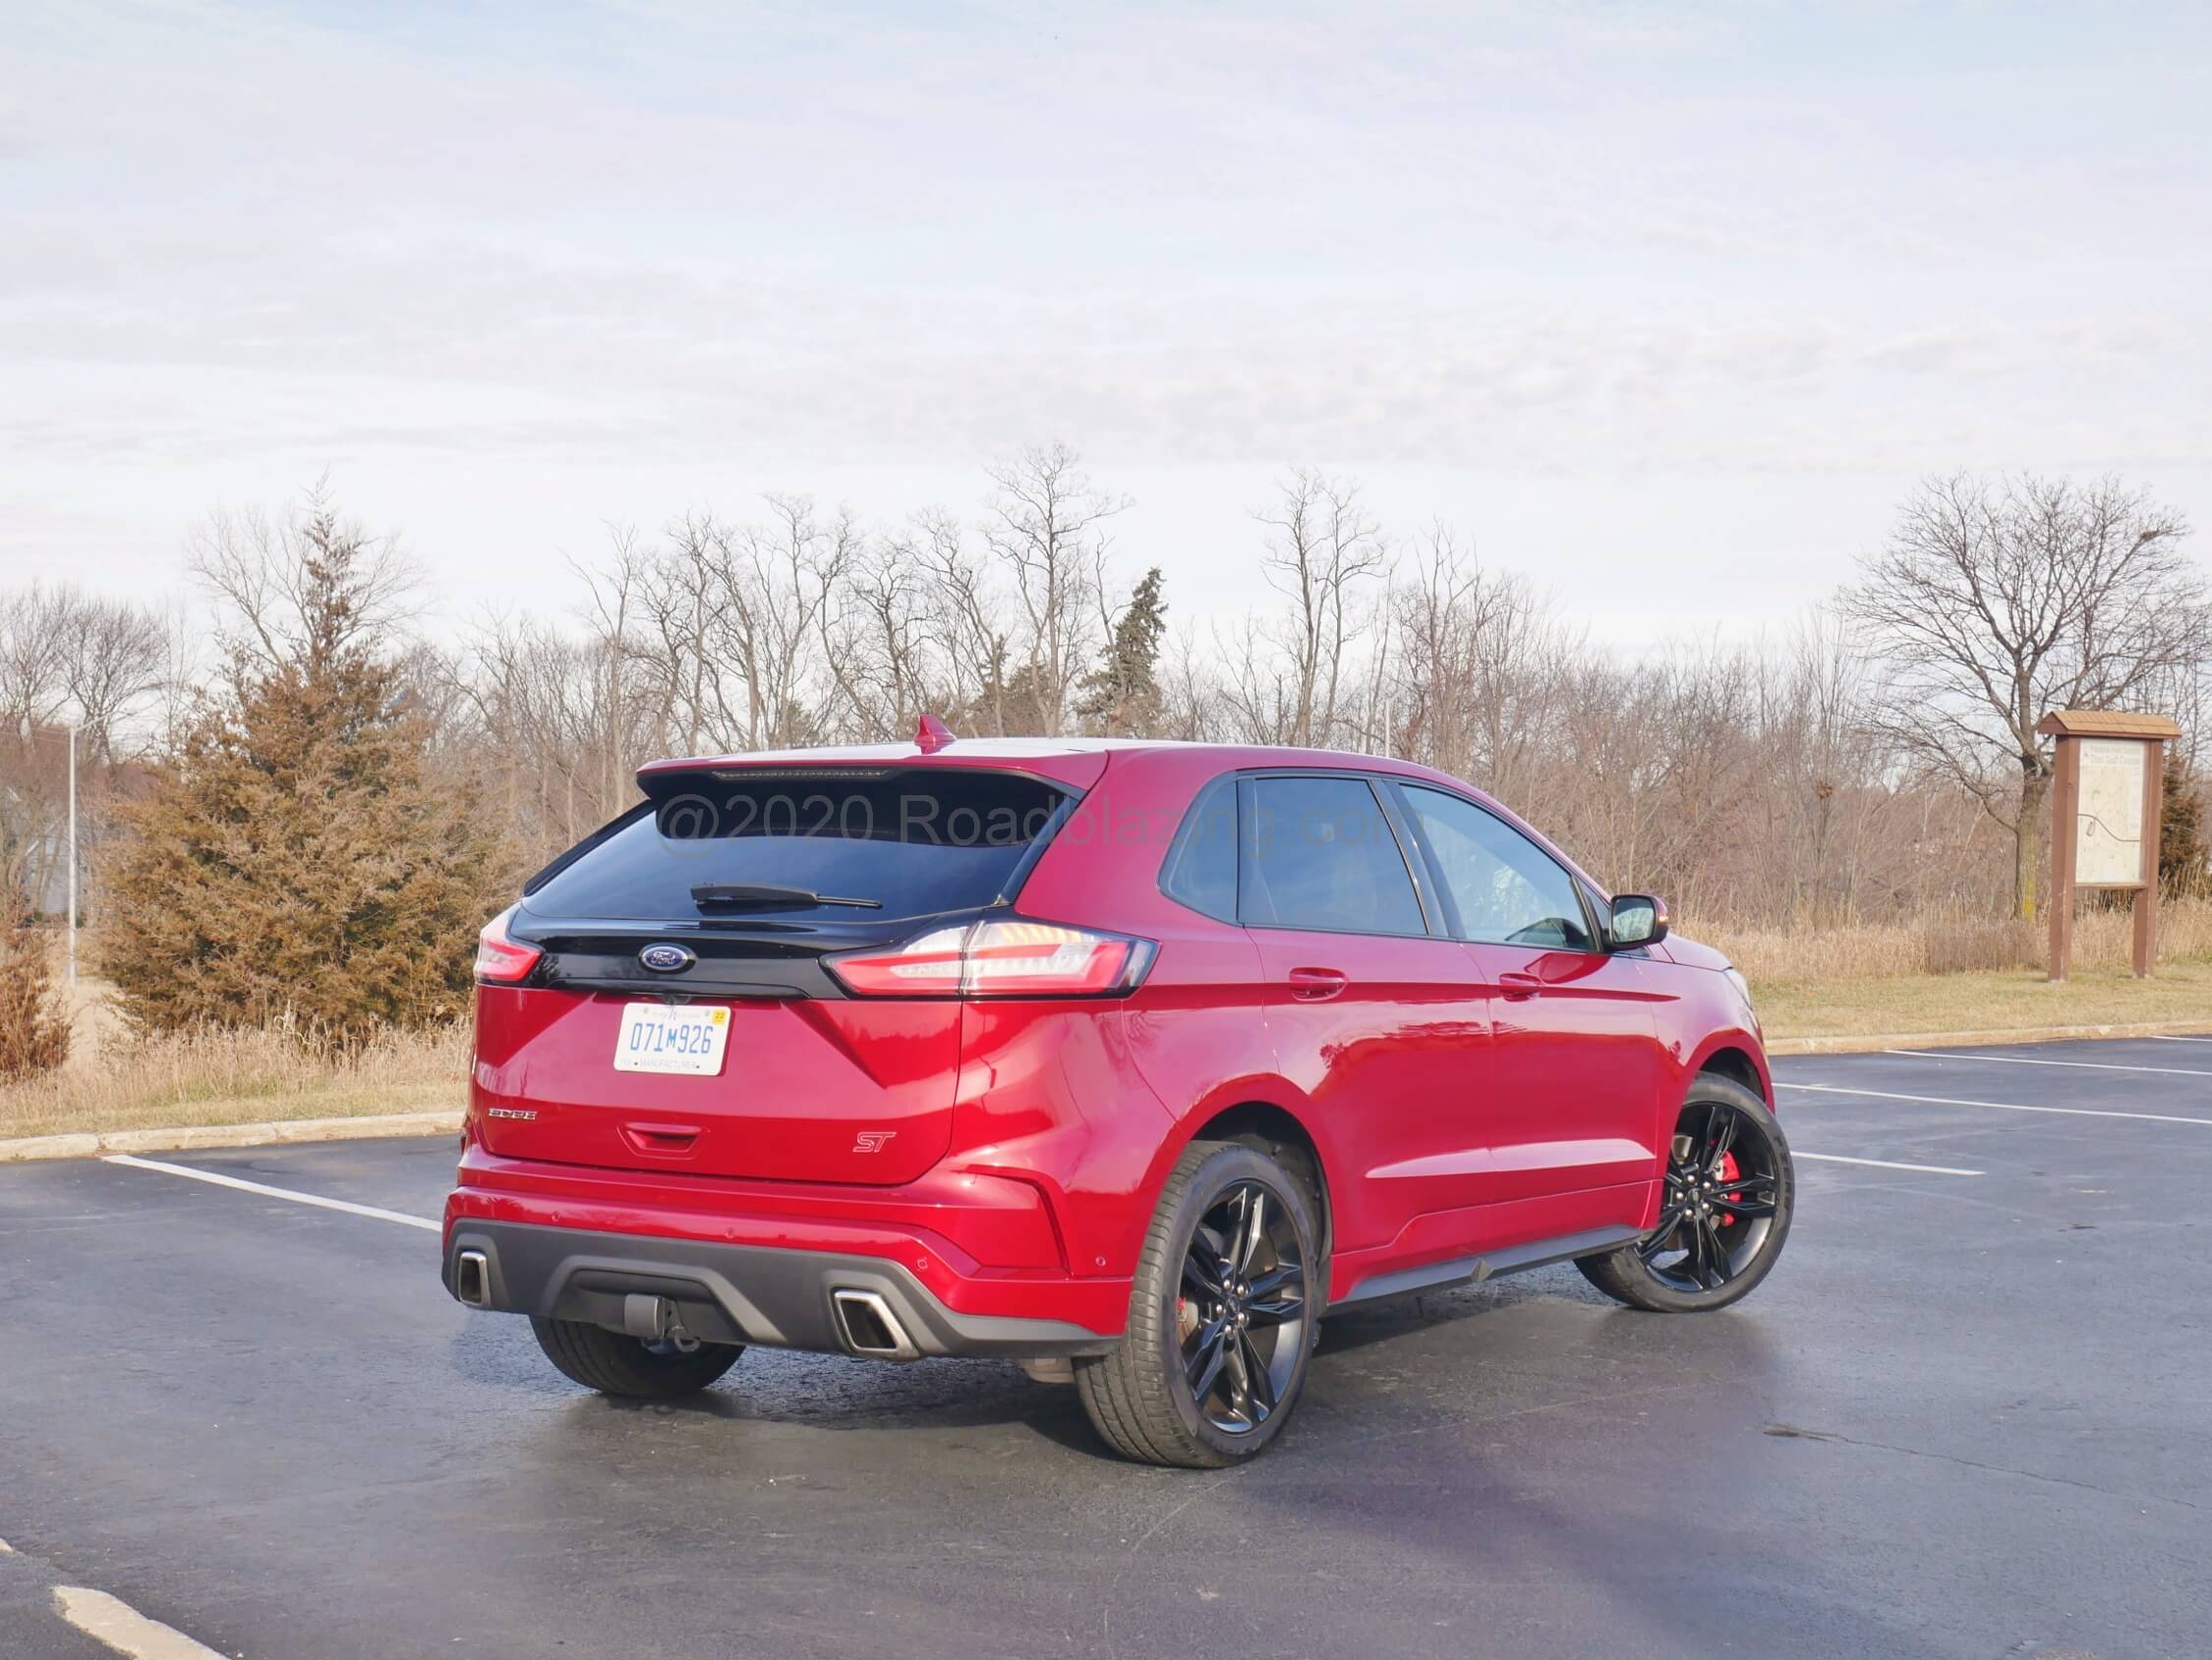 2020 Ford Edge ST: all window frames, cladding & wheels are menacing darkened, air dams, spoilers and valances aggressivized